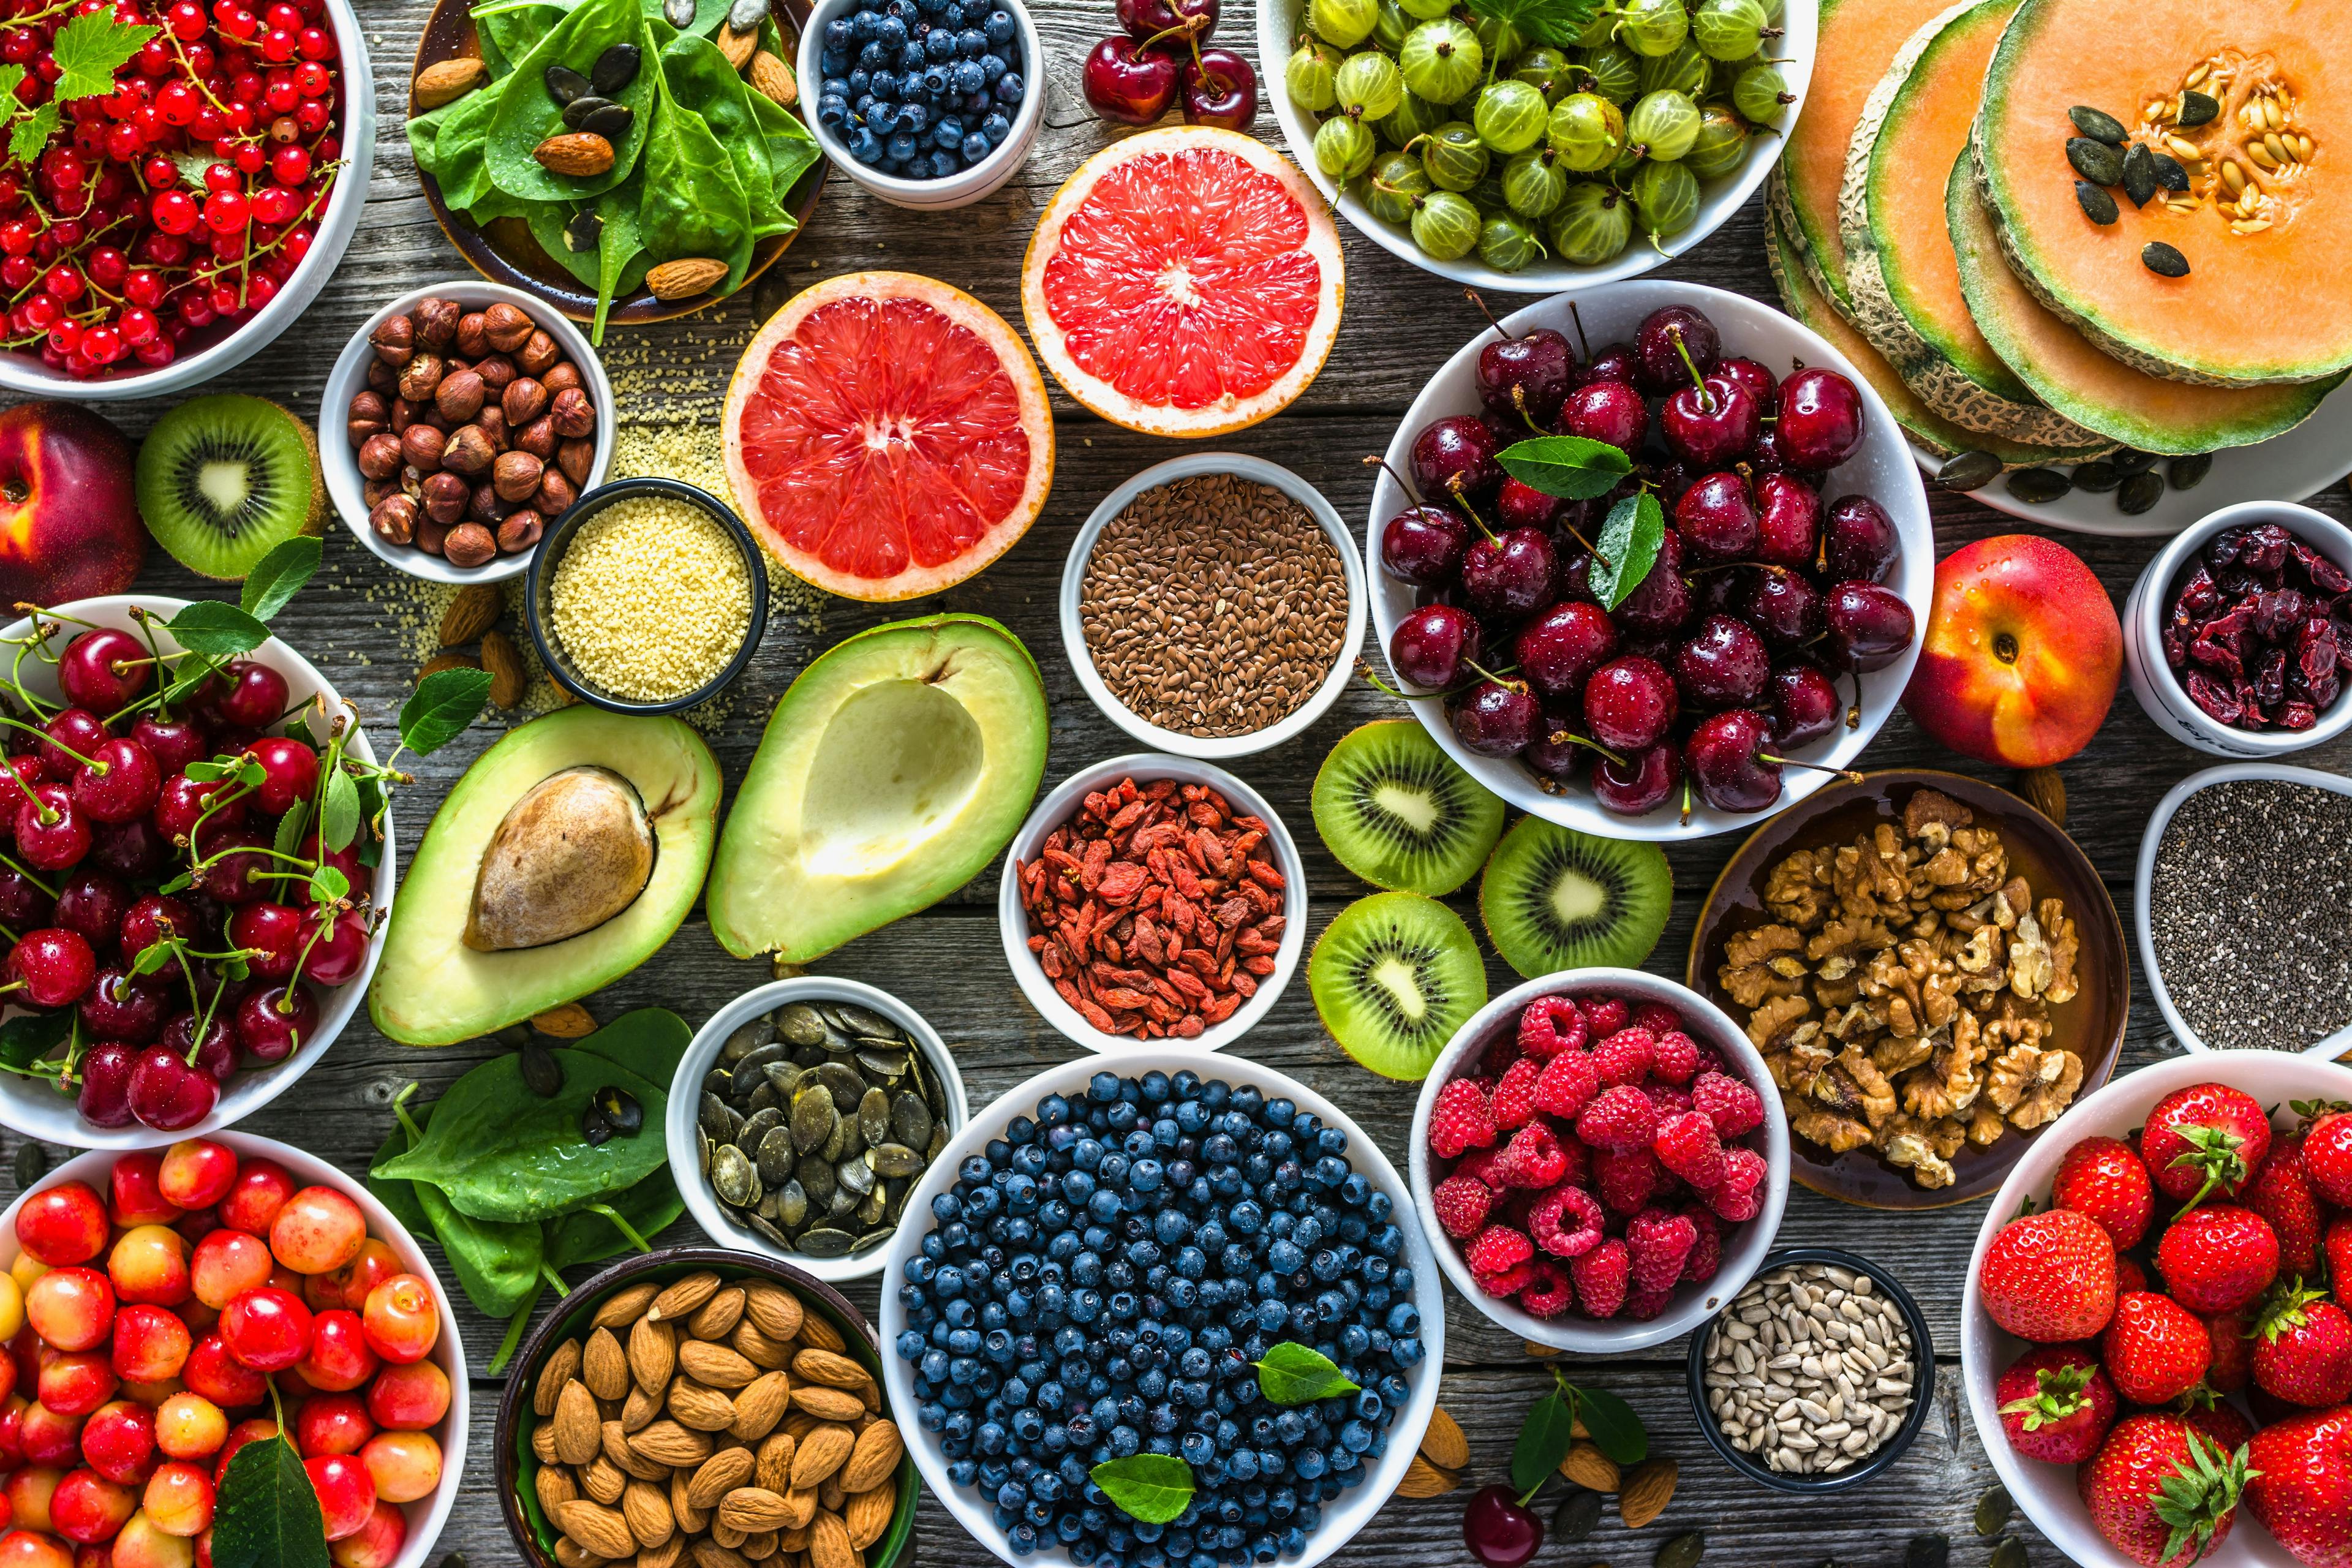 Selection of healthy food. Superfoods, various fruits and assorted berries, nuts and seeds. | Image Credit: © alicja neumiler - stock.adobe.com